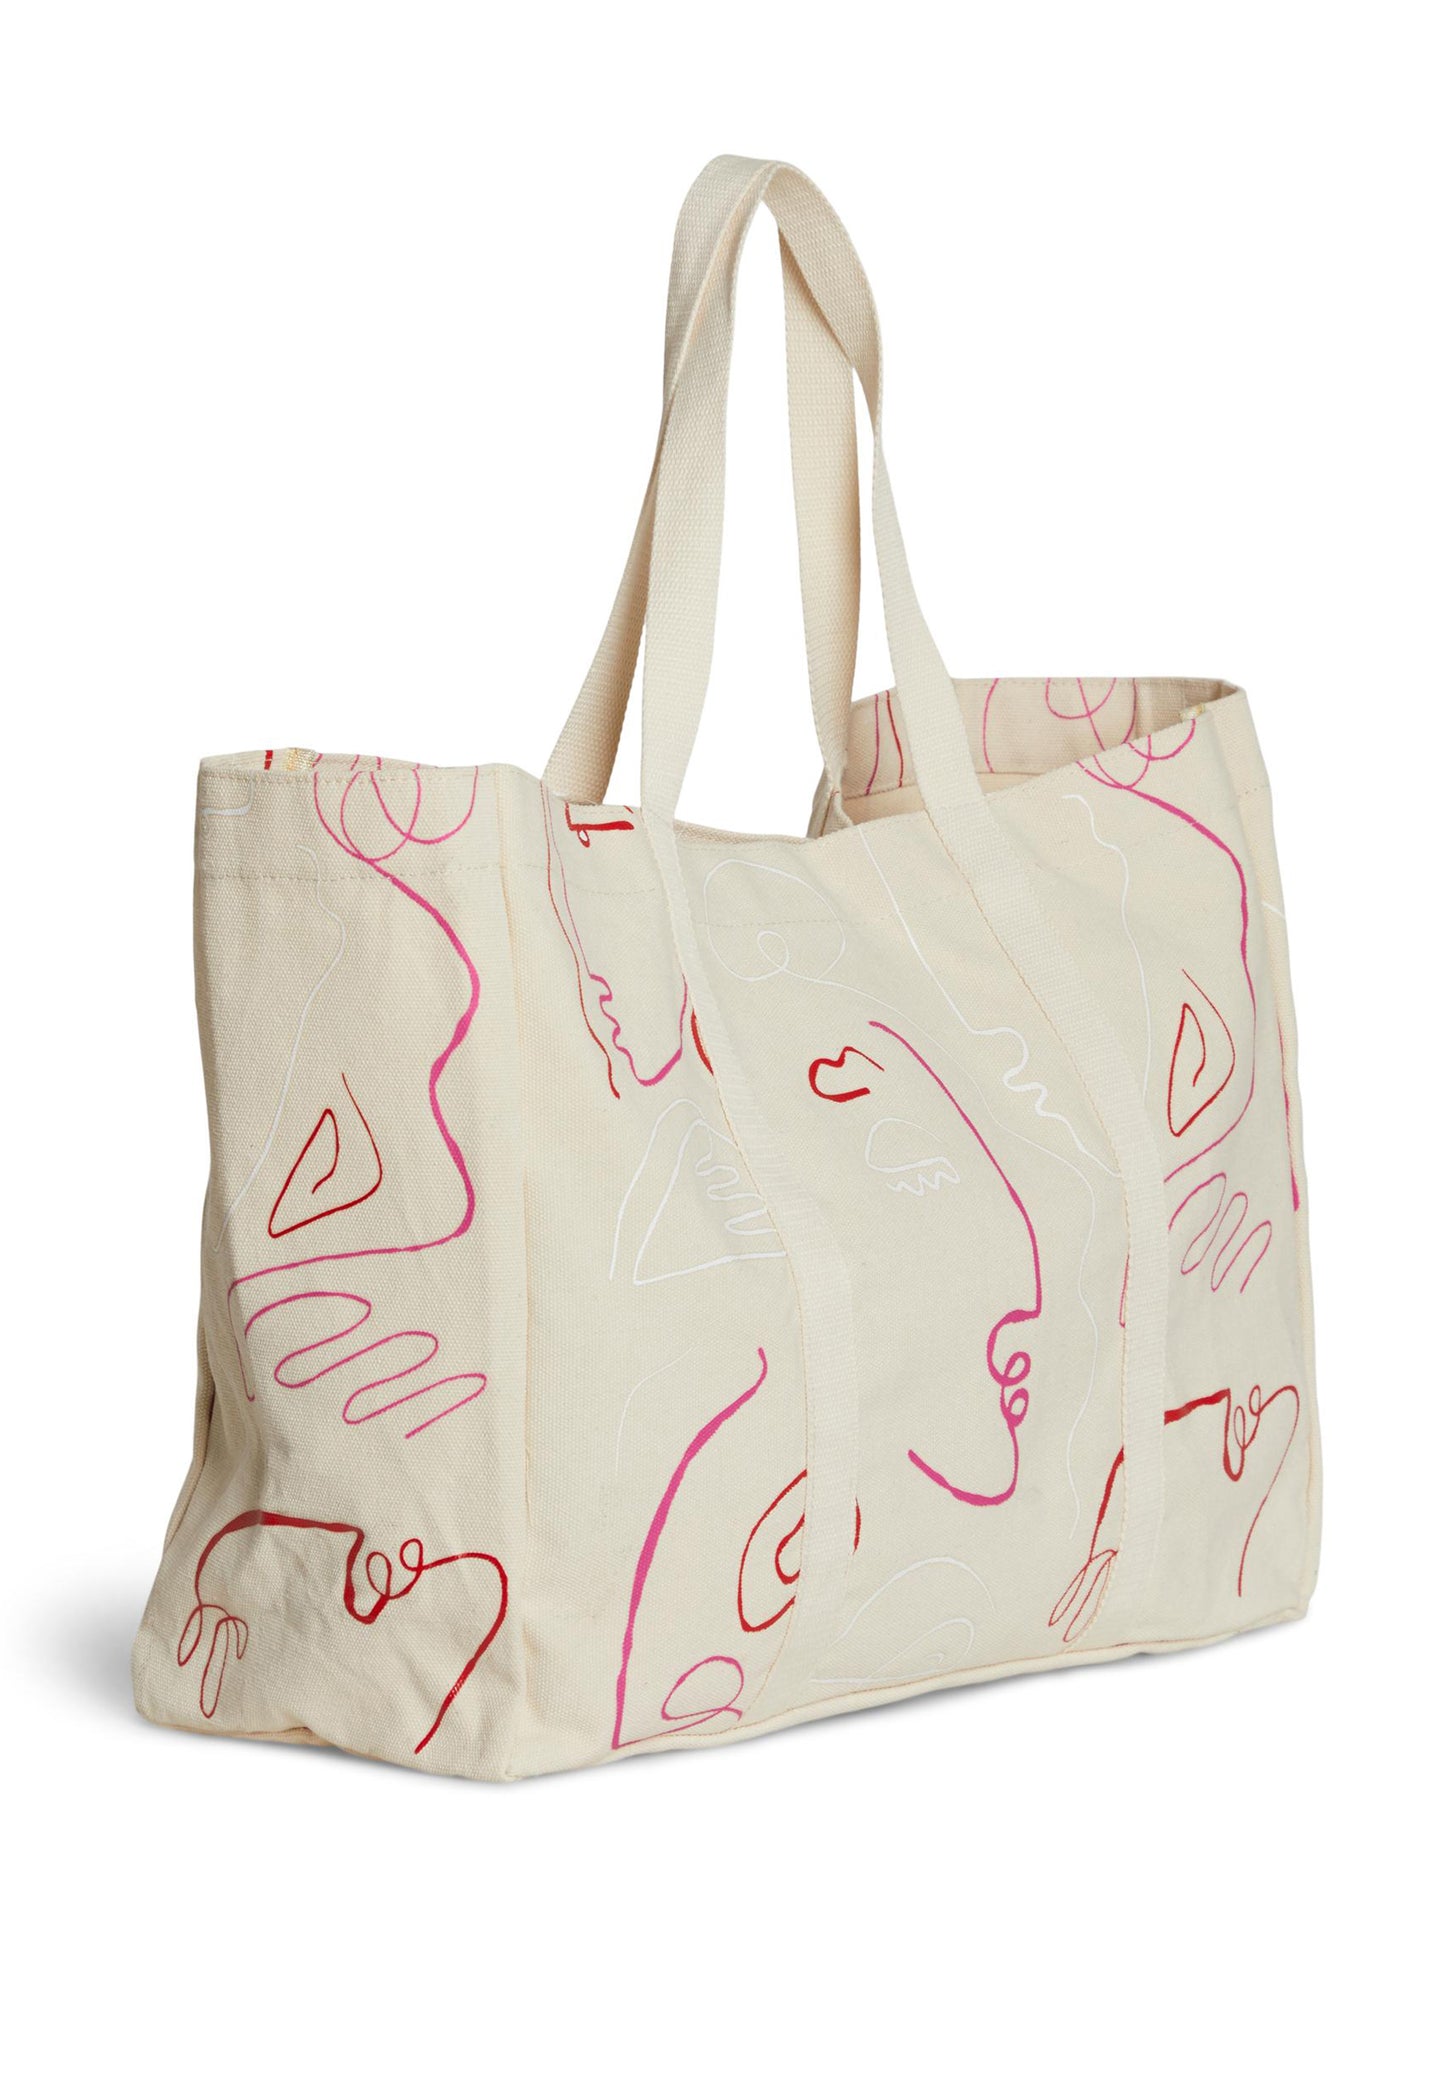 
                  
                    VILA Abstract Faces Canvas Tote Shopper Bag in Cream & Pink Tones - One Nation Clothing
                  
                